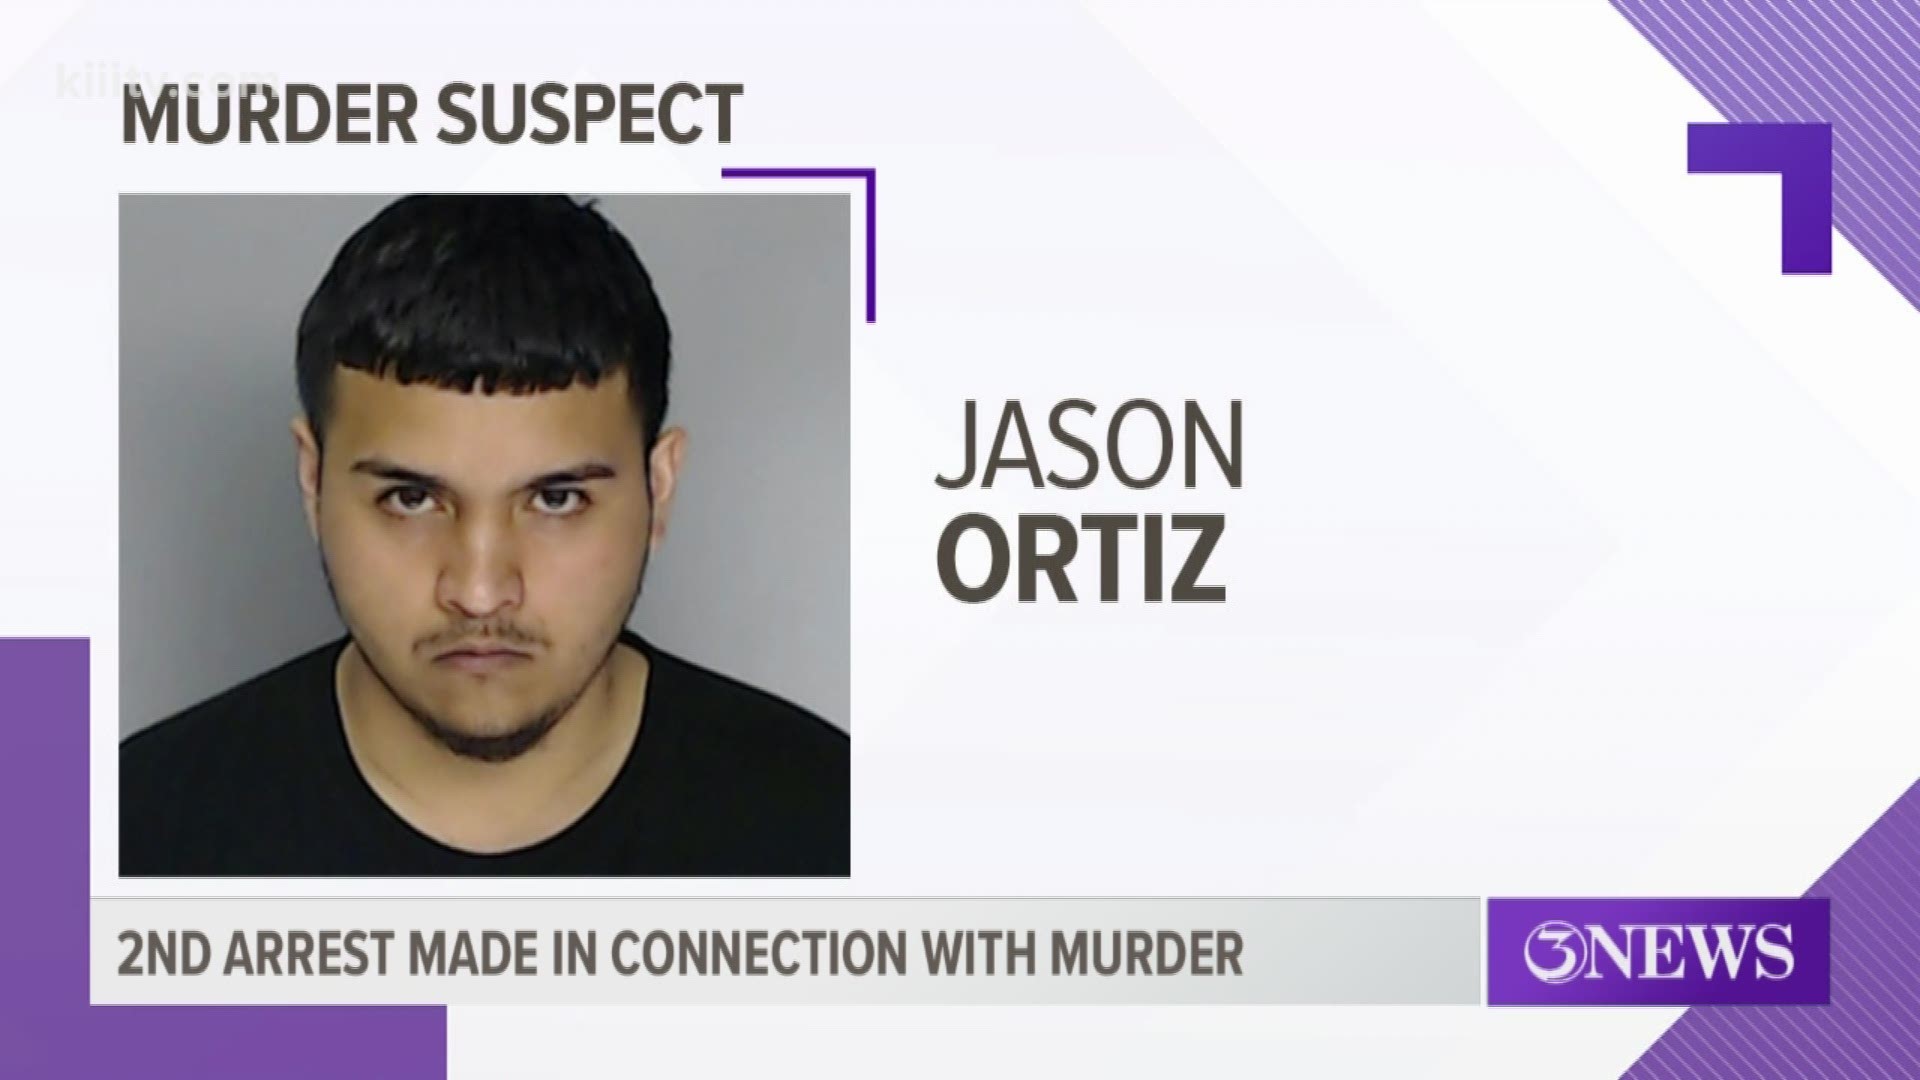 Police arrested 19-year old Jason Ortiz and charged him for his alleged involvement in the murder of 21-year old Damian Buch.